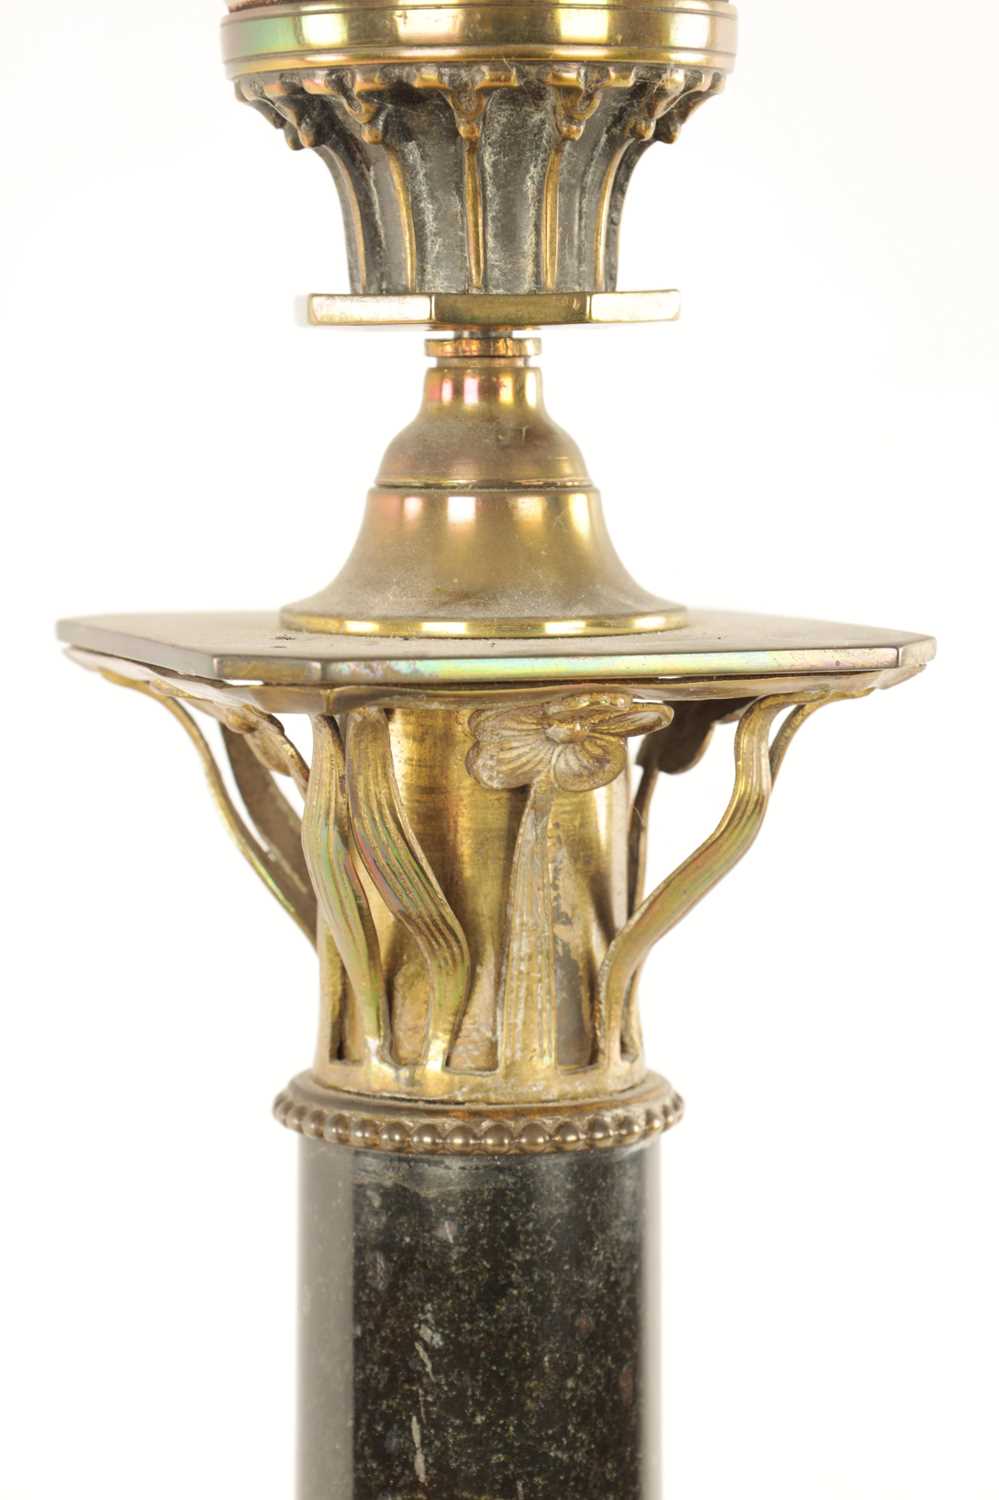 A LATE 19TH CENTURY FRENCH ORMOLU MOUNTED VERDE GREEN MARBLE OIL LAMP - Image 5 of 8